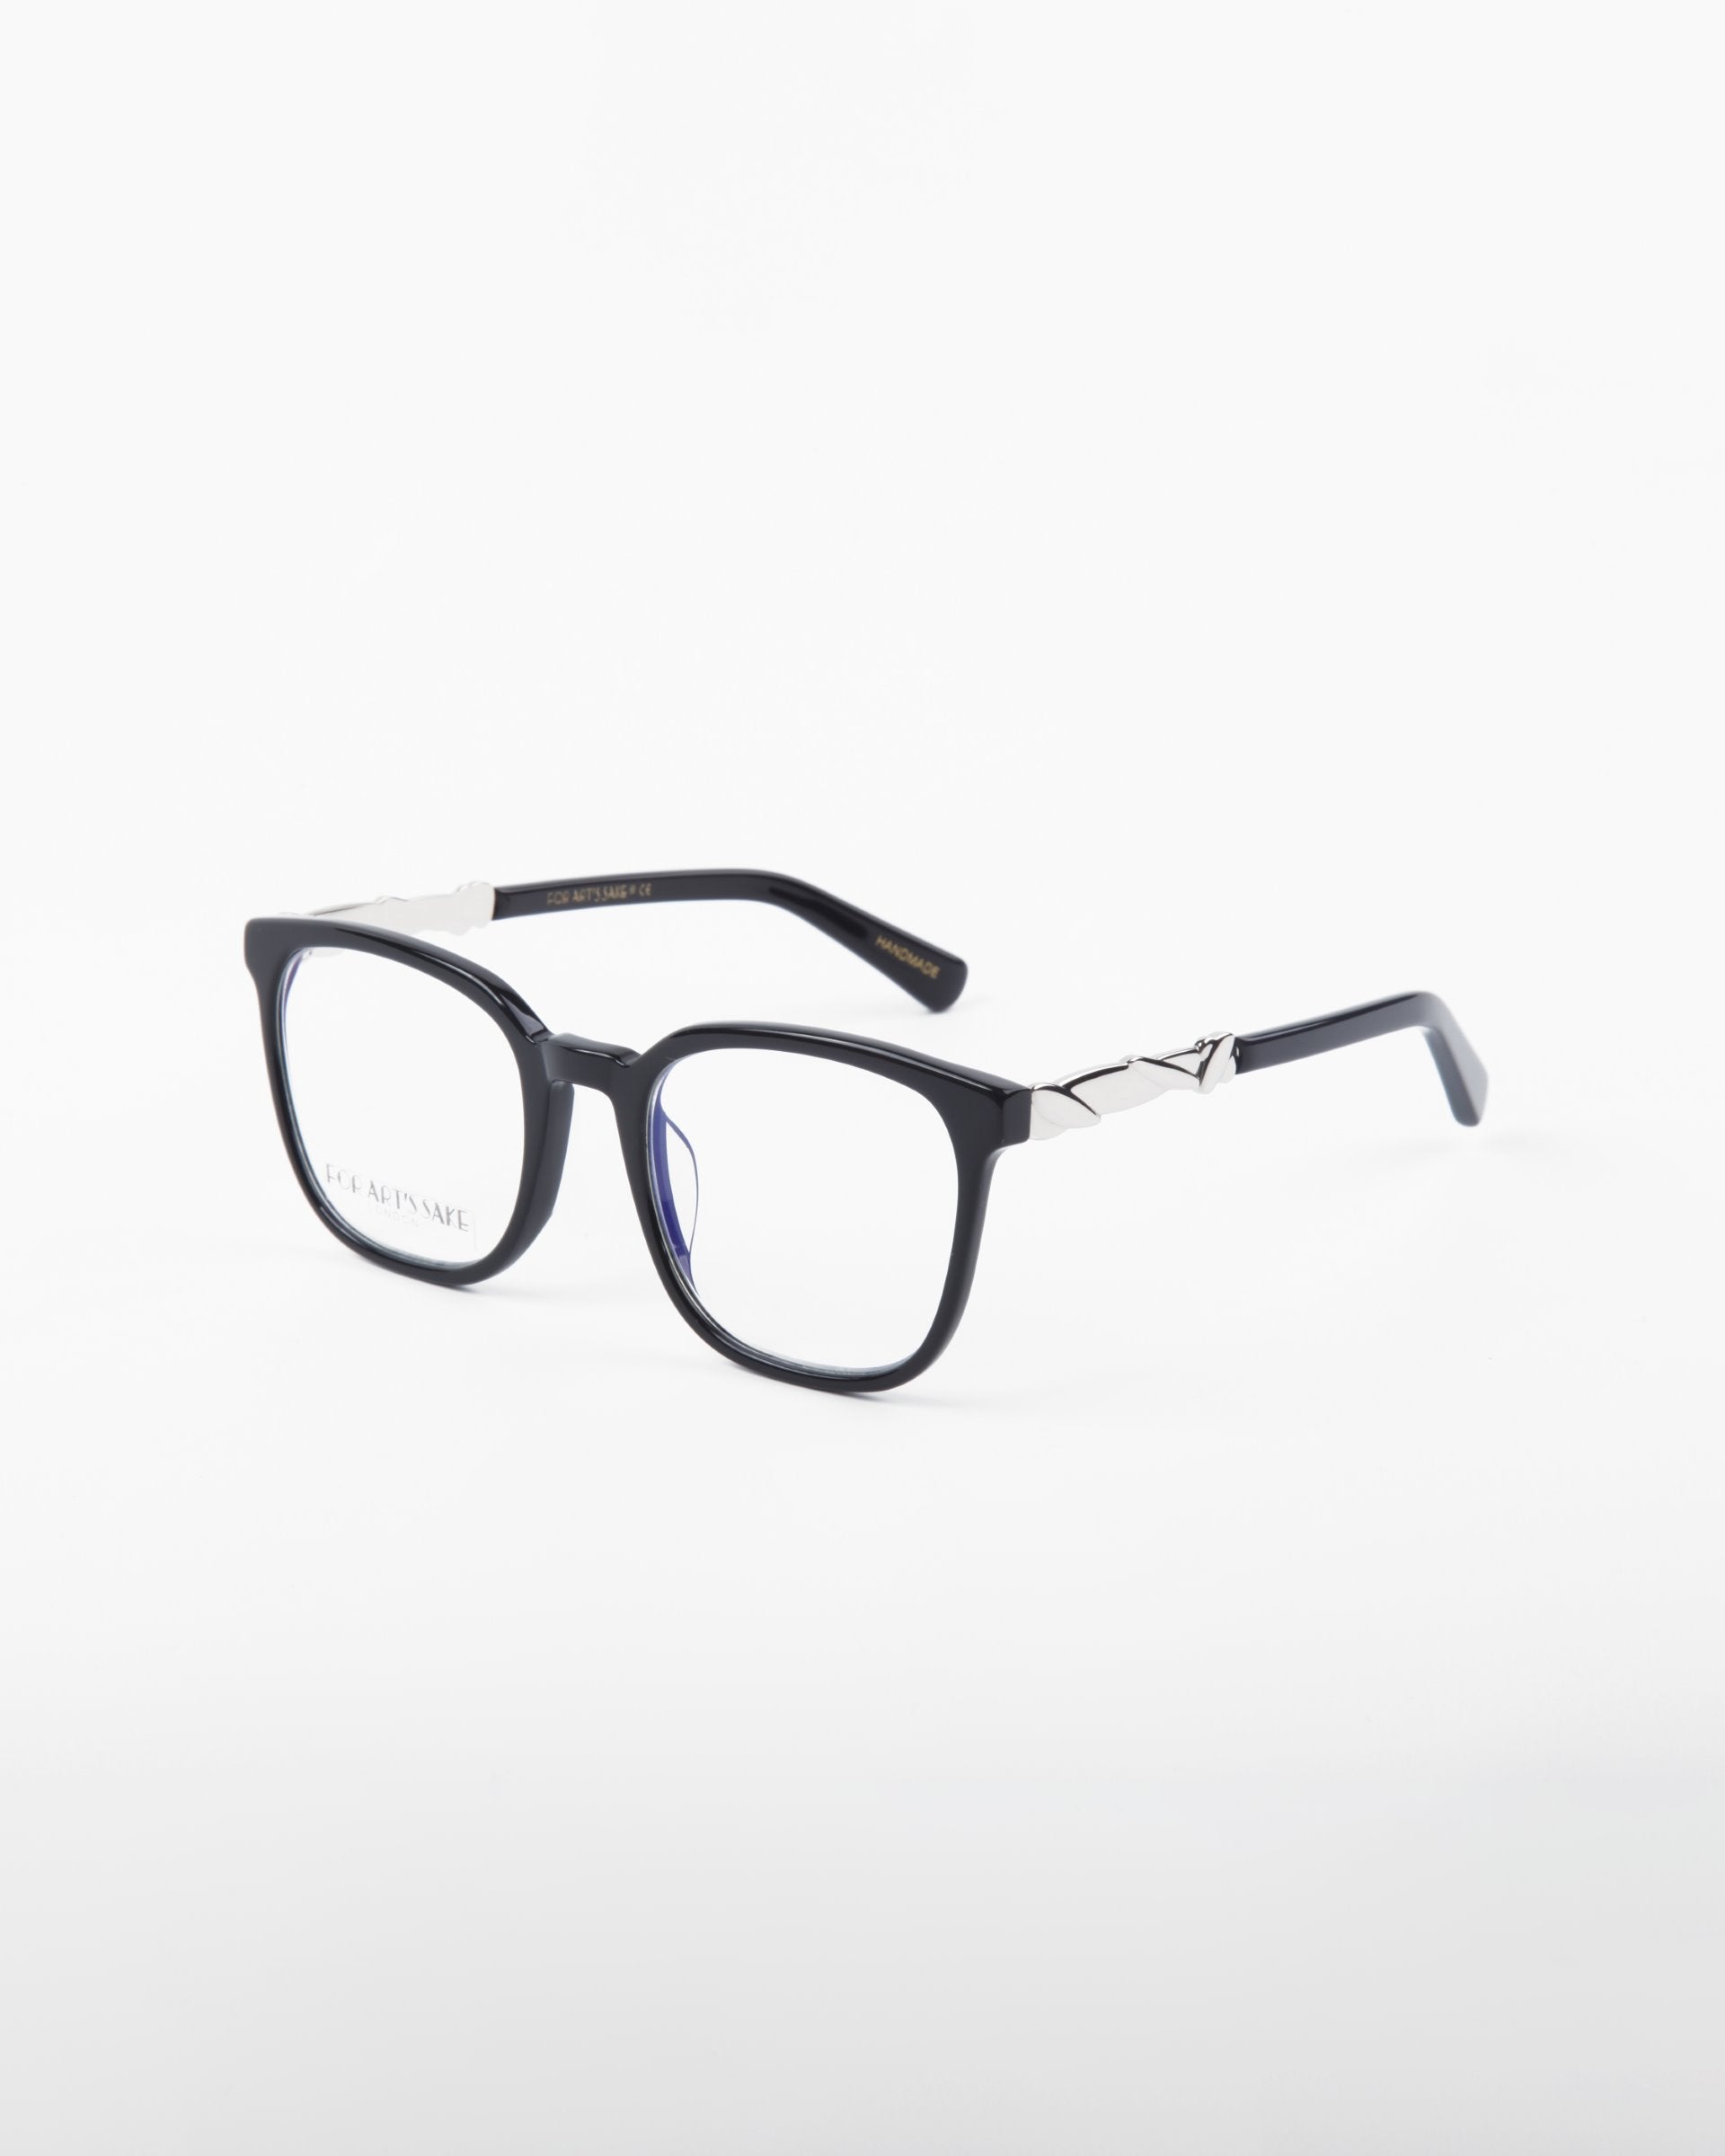 A pair of Molten by For Art&#39;s Sake® black-rimmed eyeglasses with square lenses is displayed on a white background. These prescription eyewear glasses feature metallic accents on the temples, adding a touch of style and elegance to the design.
